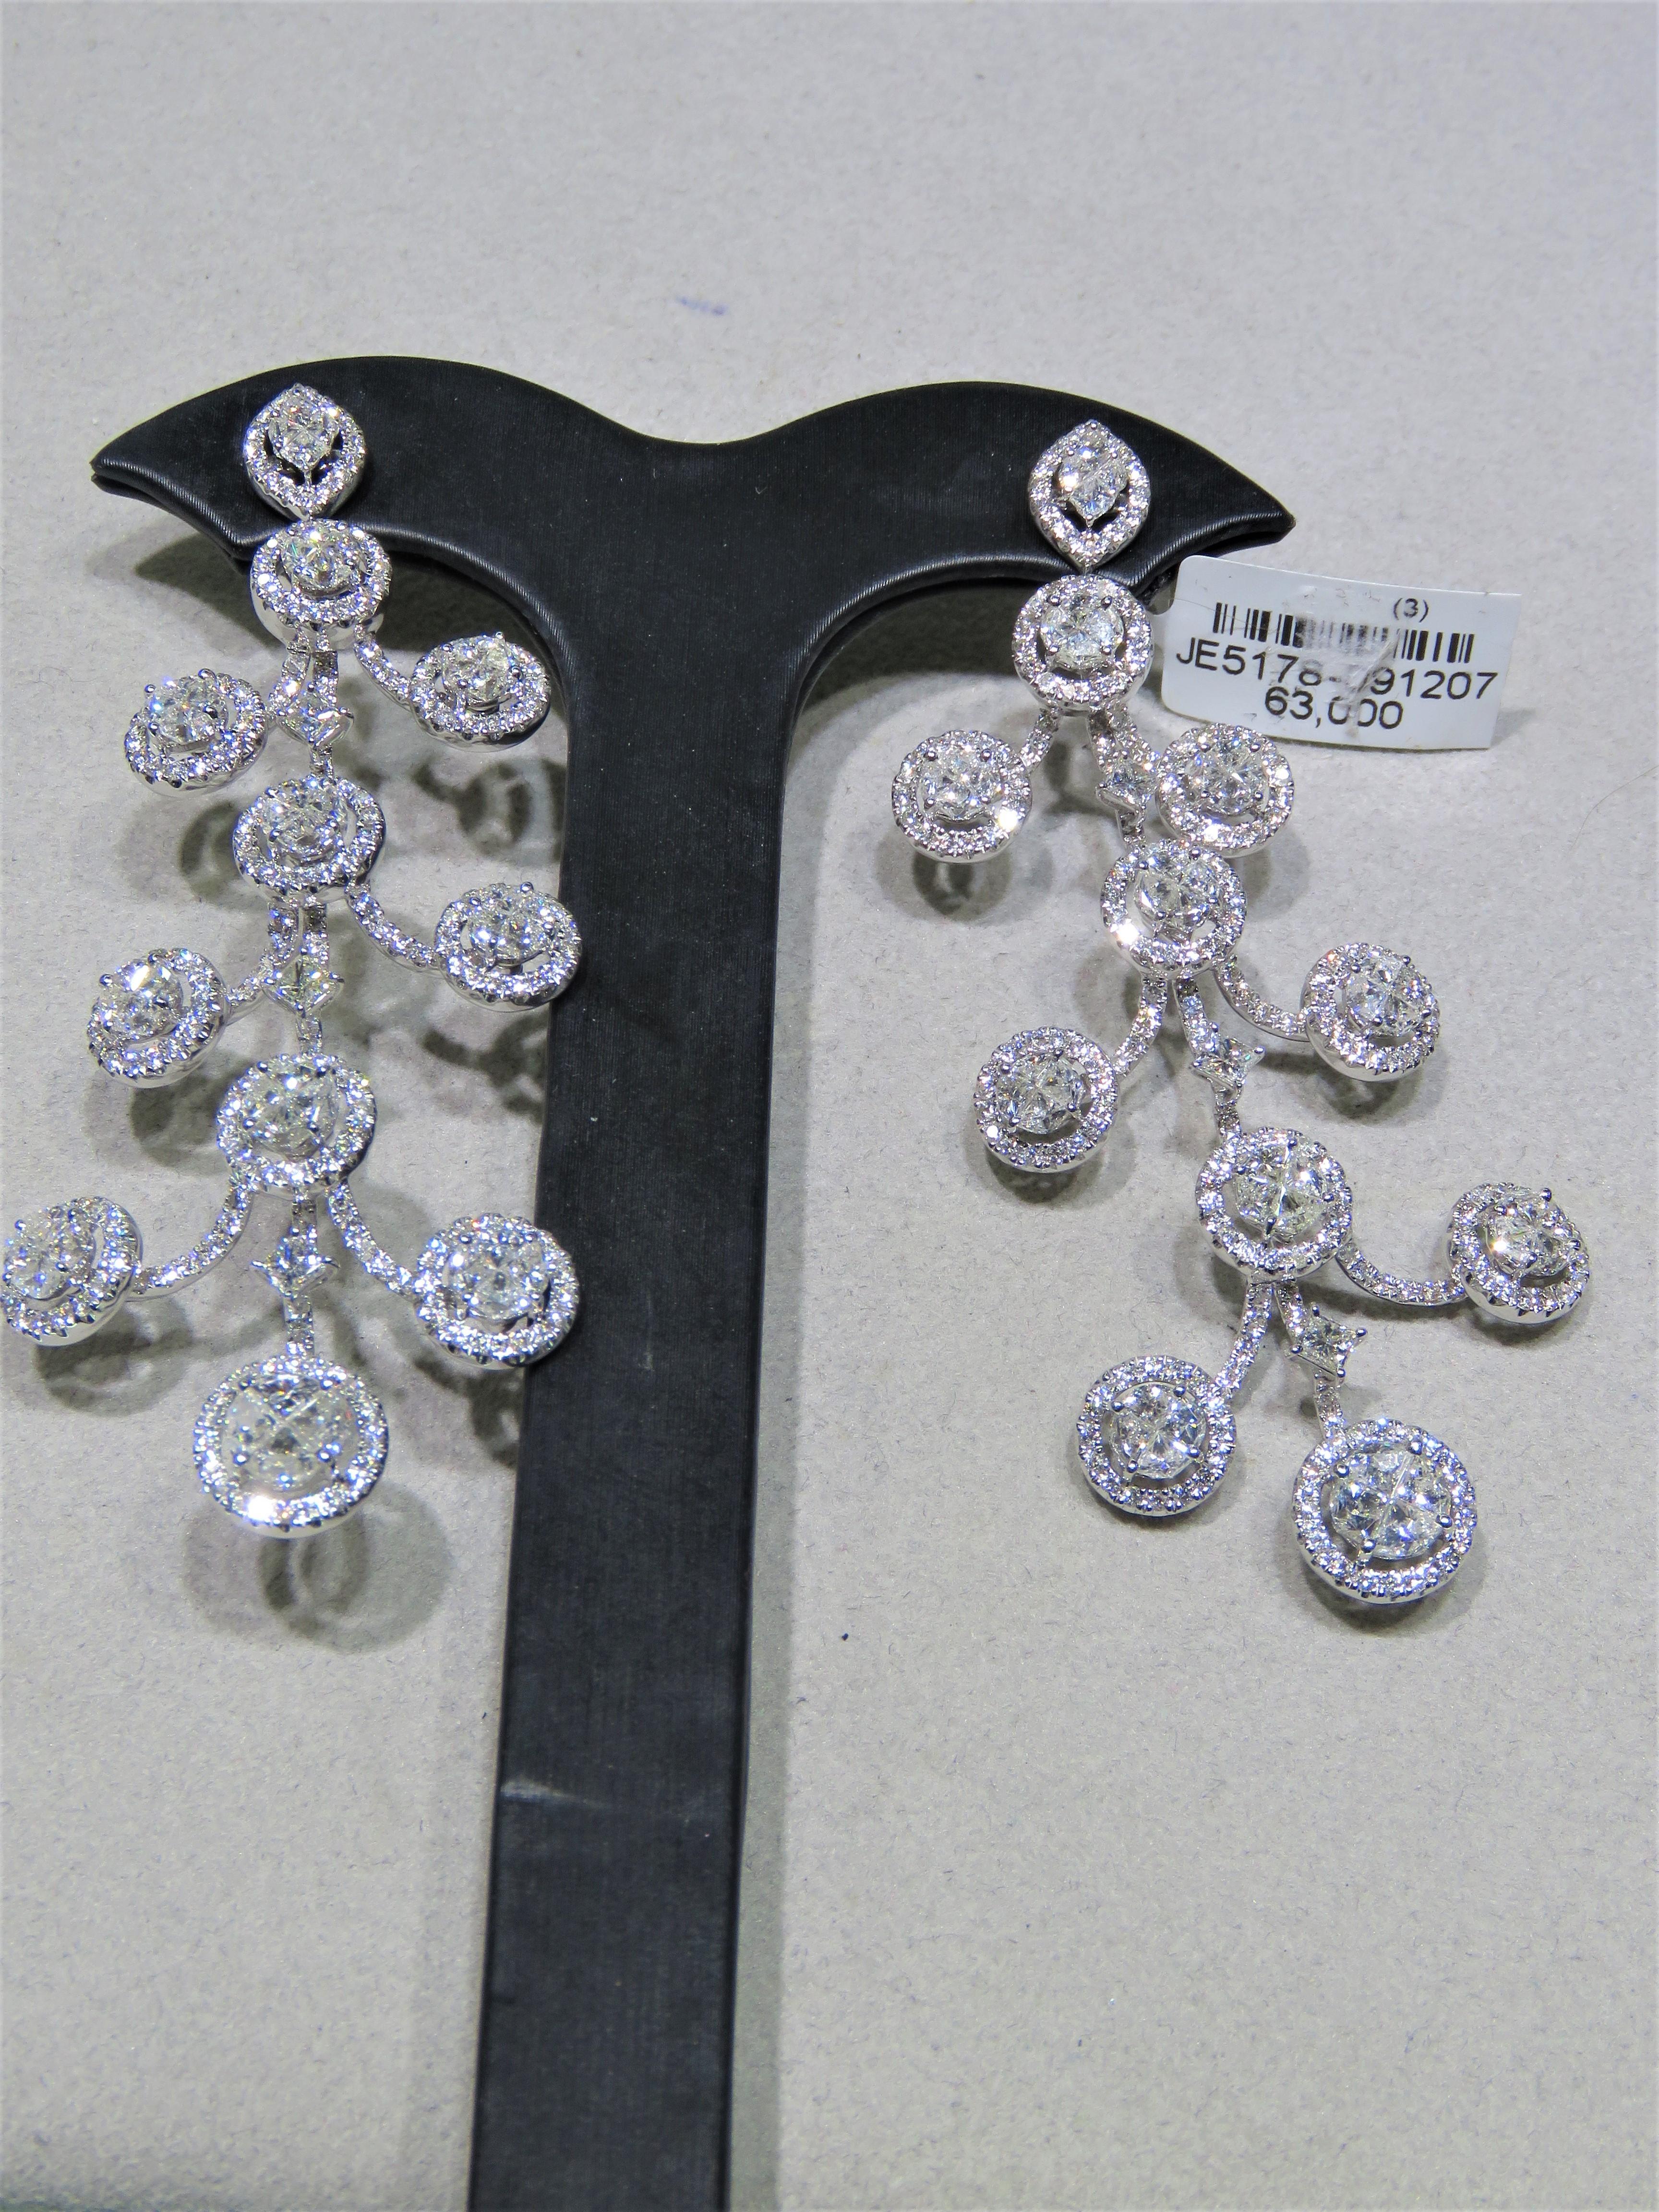 Mixed Cut NWT $63, 000 18KT Gold Fancy 10.50CT Gorgeous Exquisite Diamond Dangling Earrings For Sale